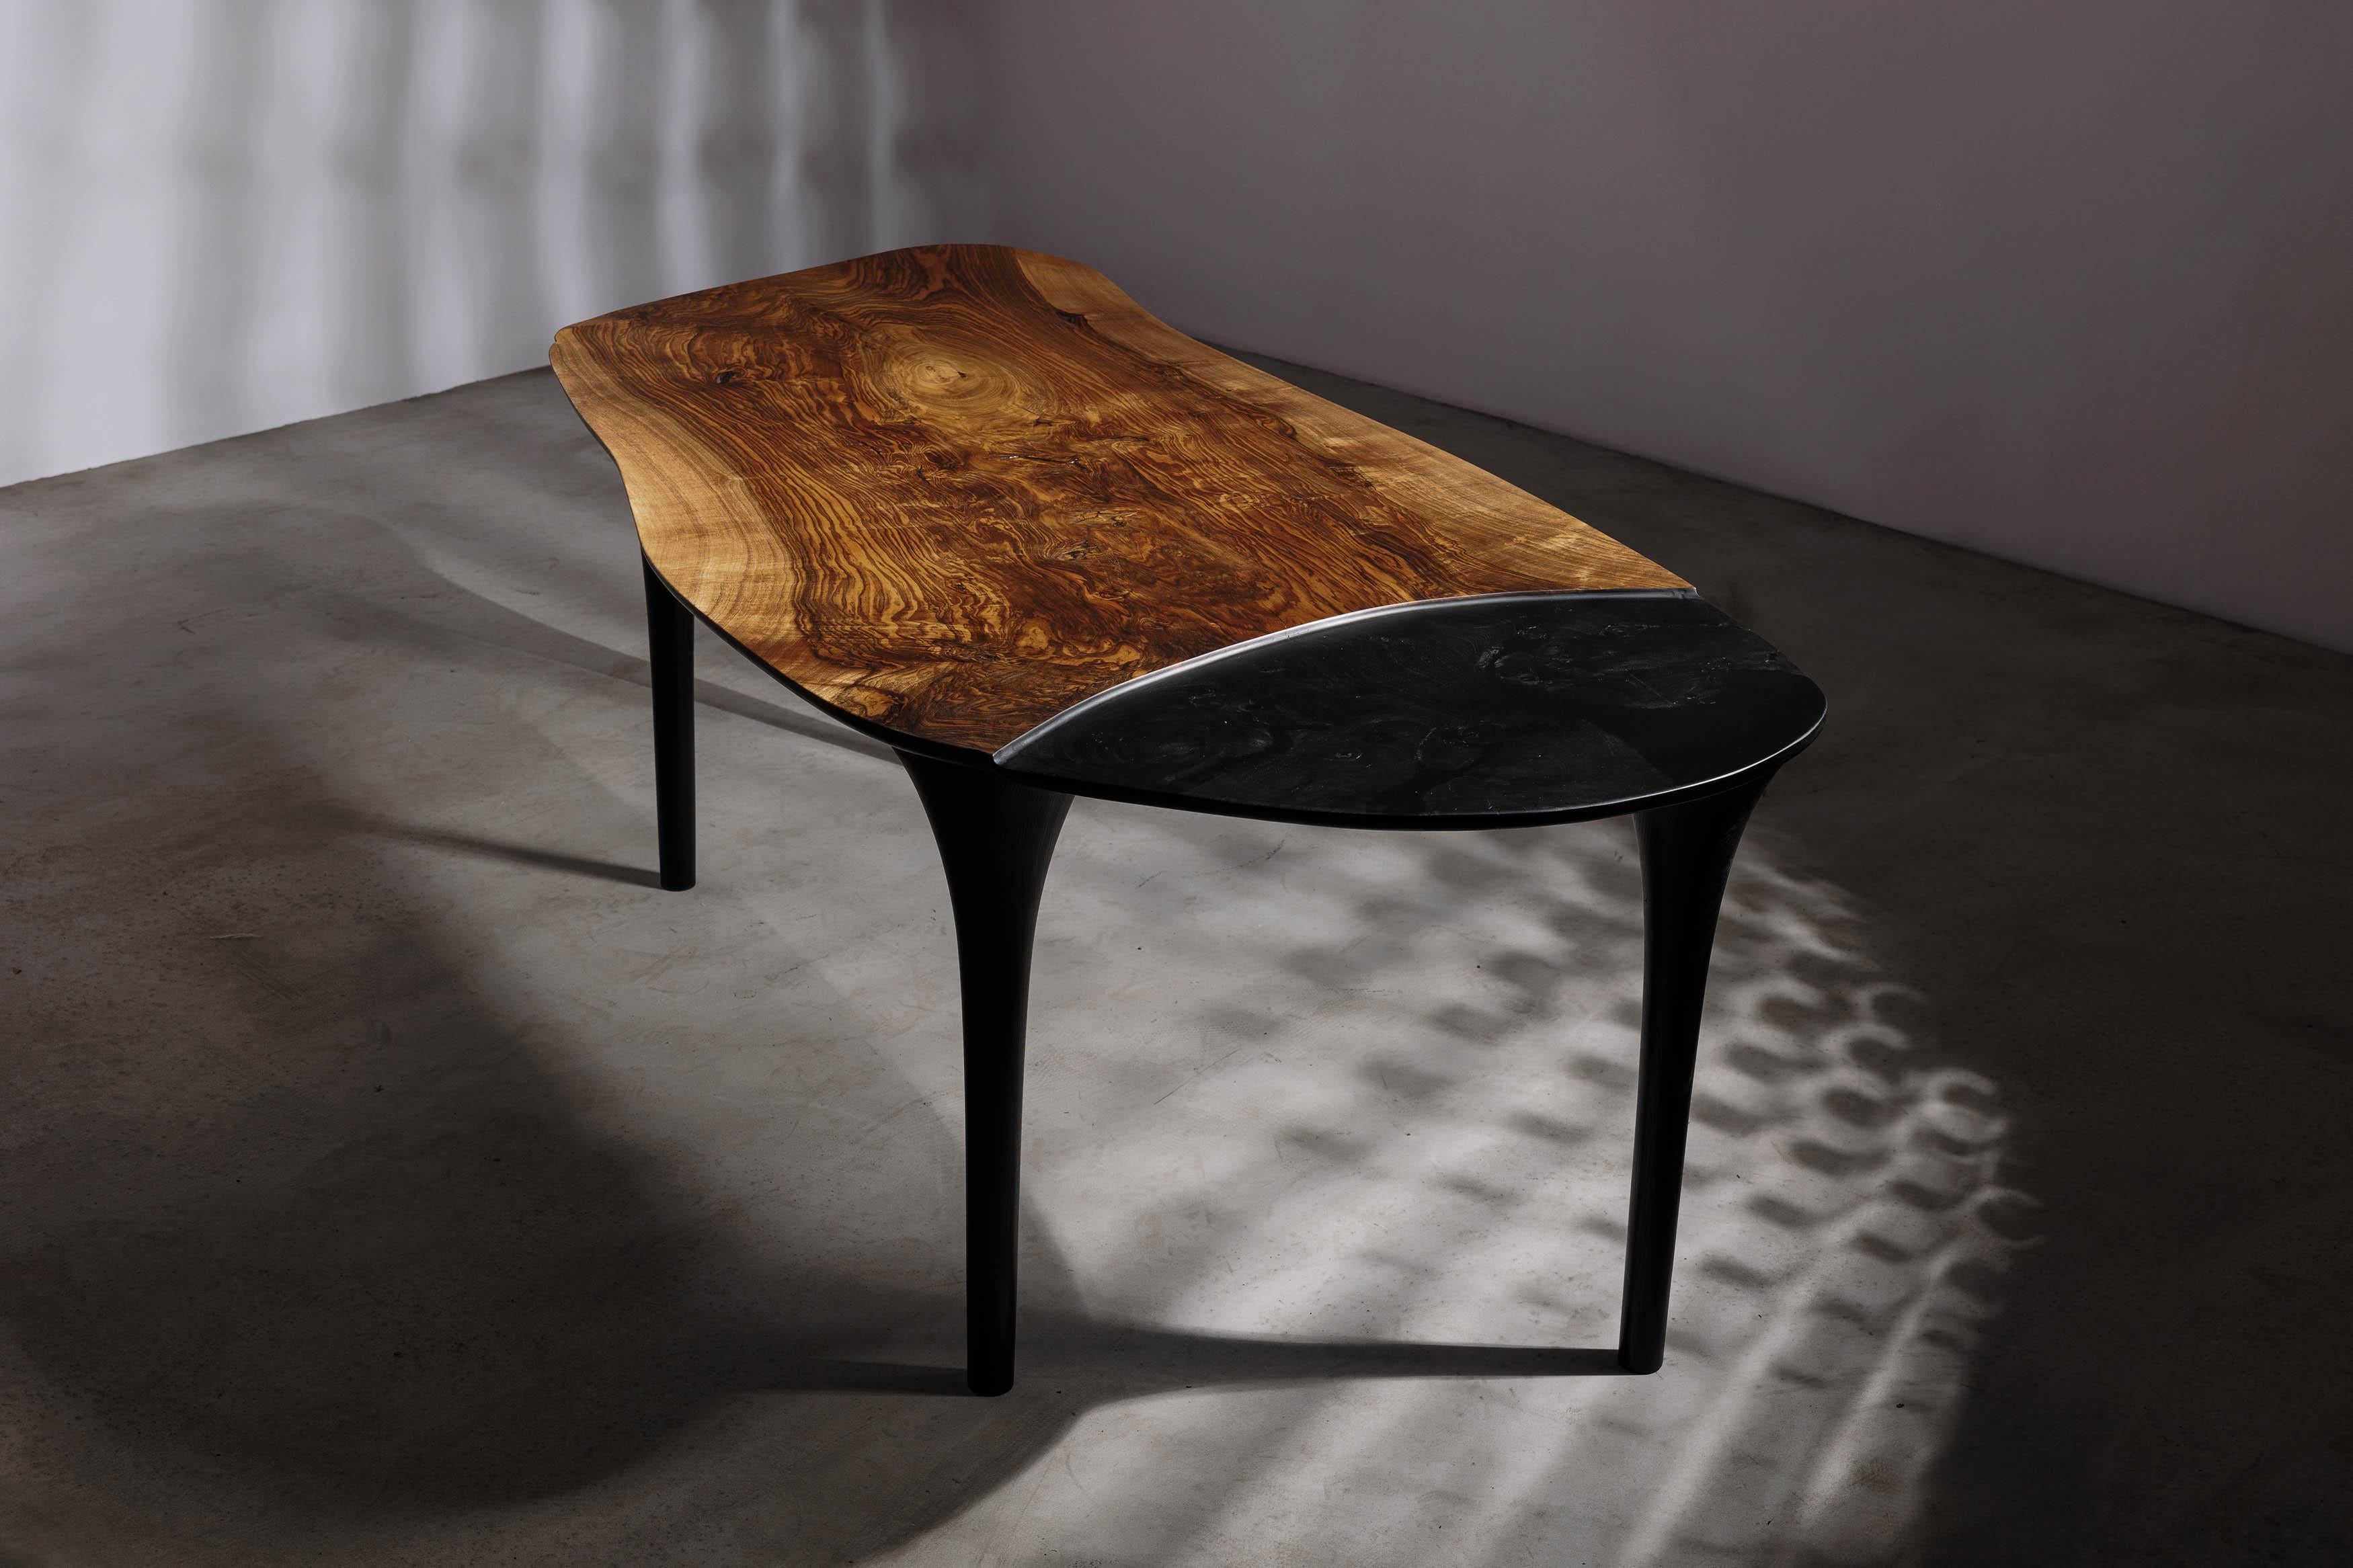 EM210 coffee table by Eero Moss
One of a kind
Dimensions; W 200 x D 96 x H 78 cm
Materials: Walnut, ash, India ink.
Finish: Natural oils.

Erosio Collection

This collection is an ode to the fluid, organic shapes found in the natural world.